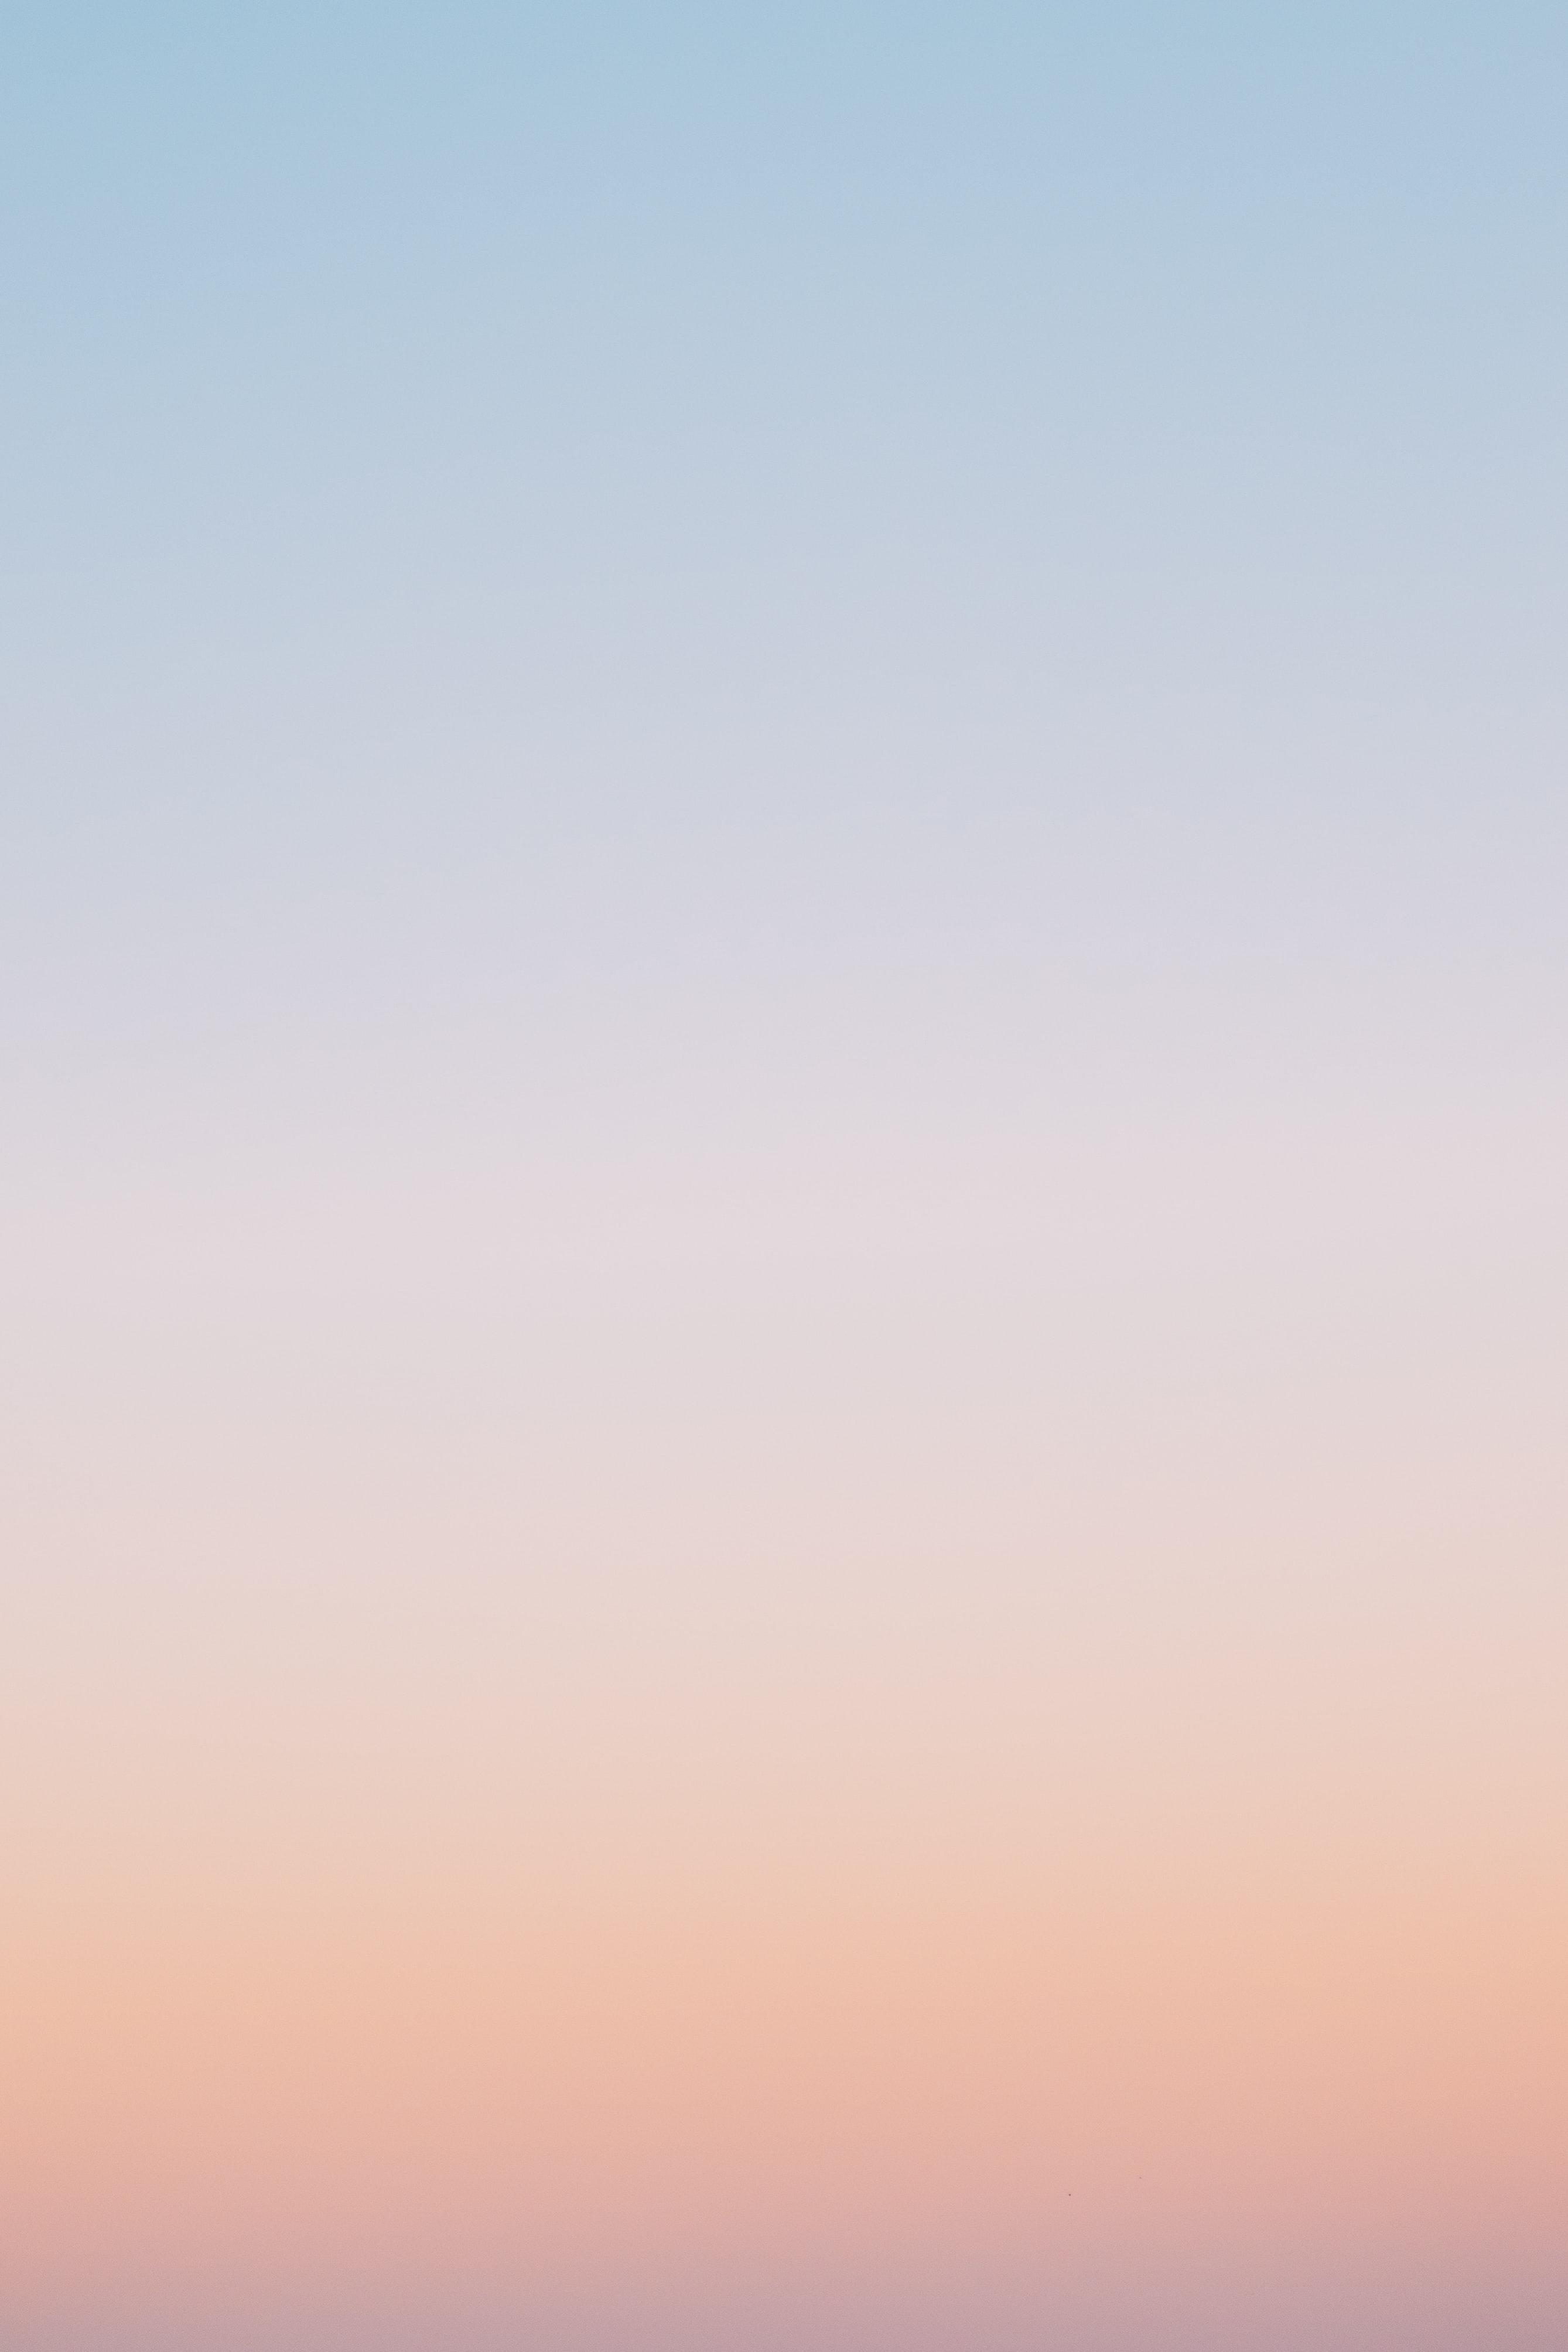 gradient, abstract, background, sky, pink, blue